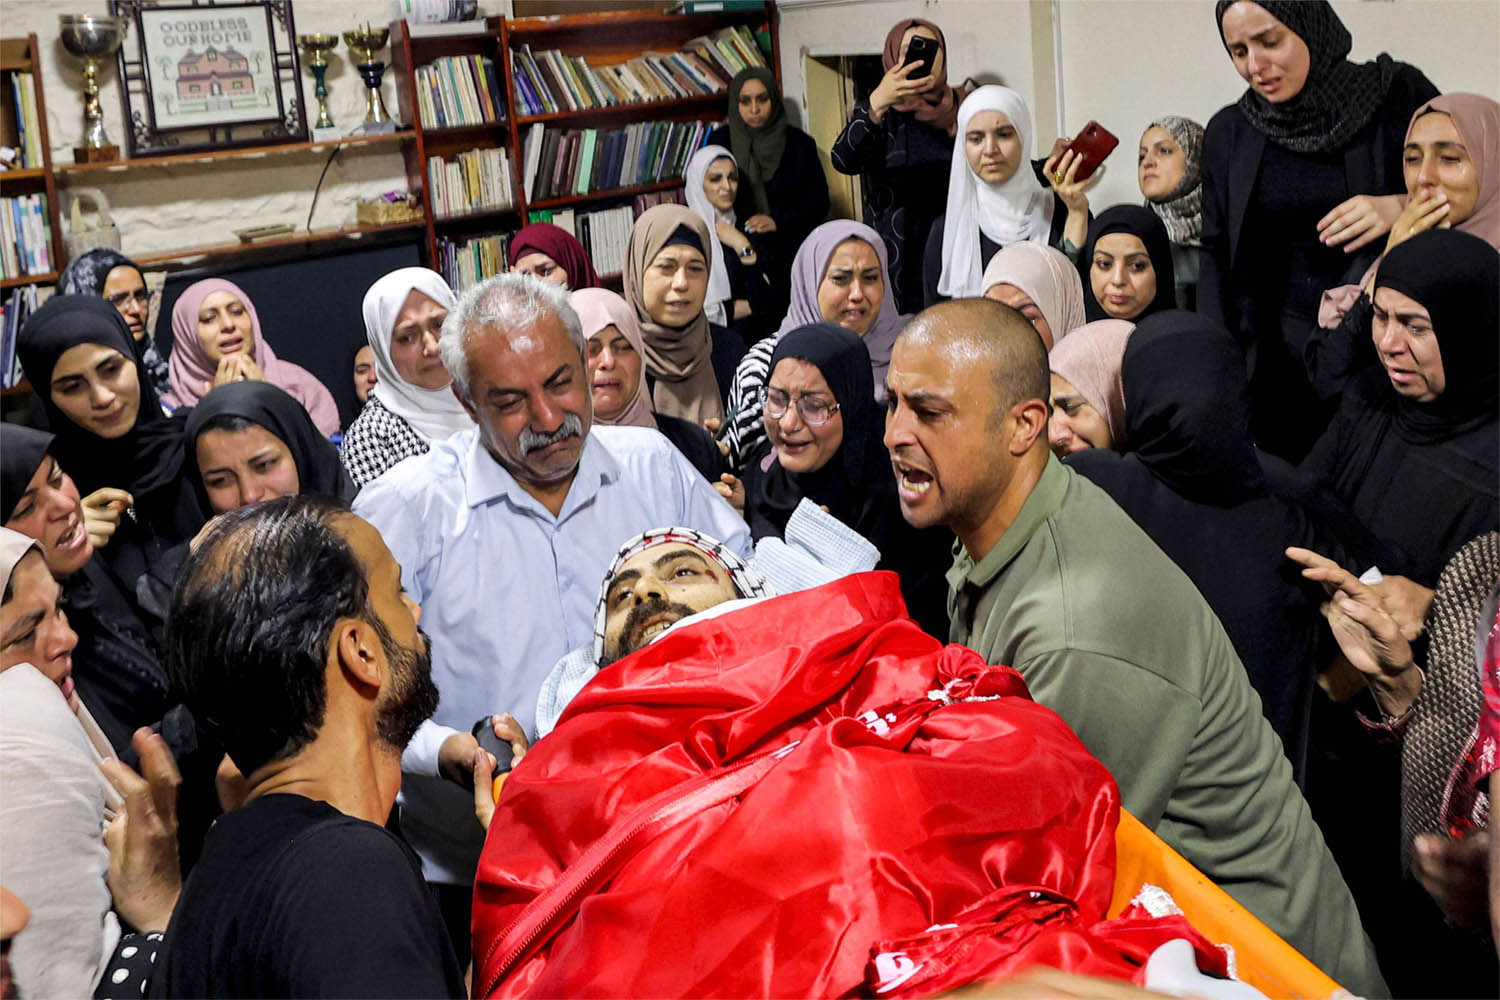 Relatives mourn by the body of Palestinian Ali Harb